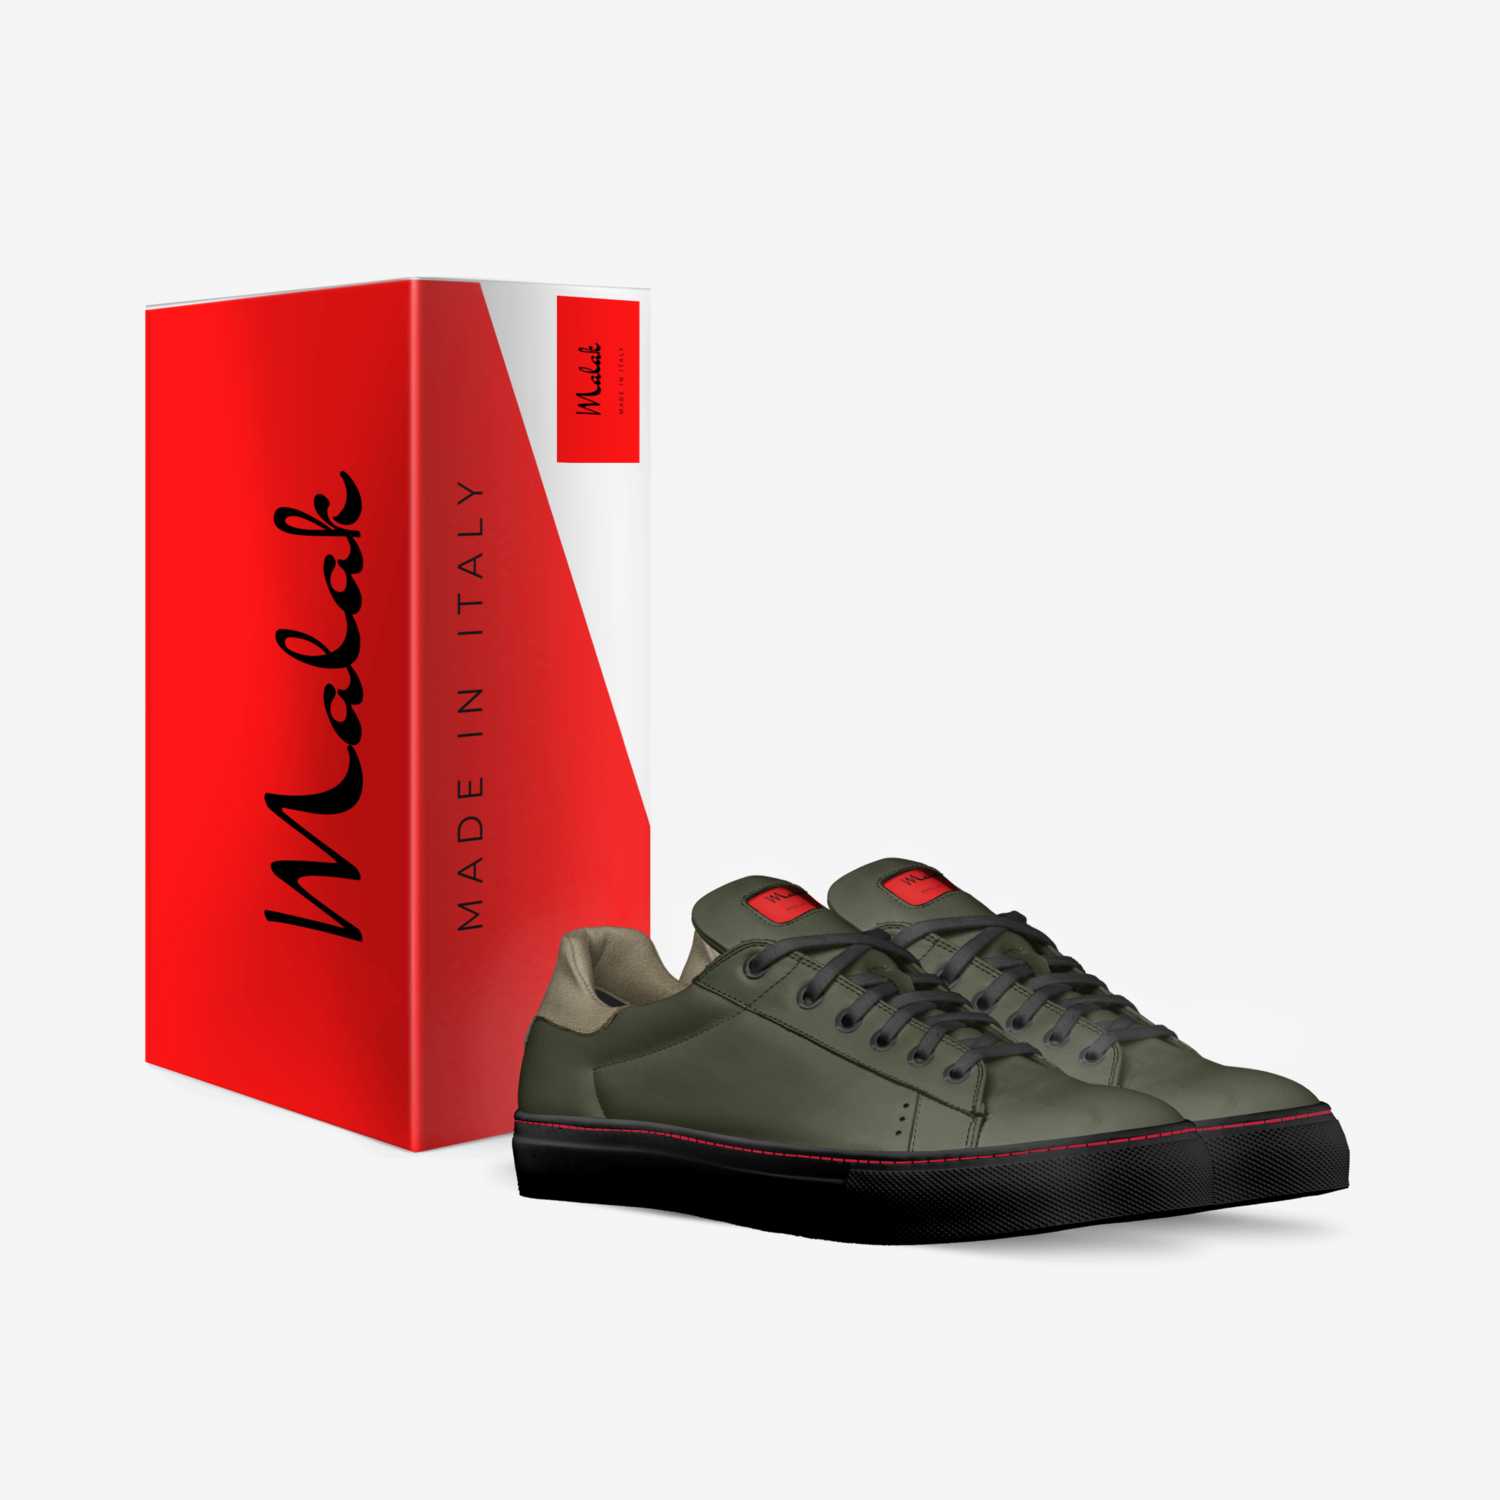 MALAK custom made in Italy shoes by Angel Penn | Box view